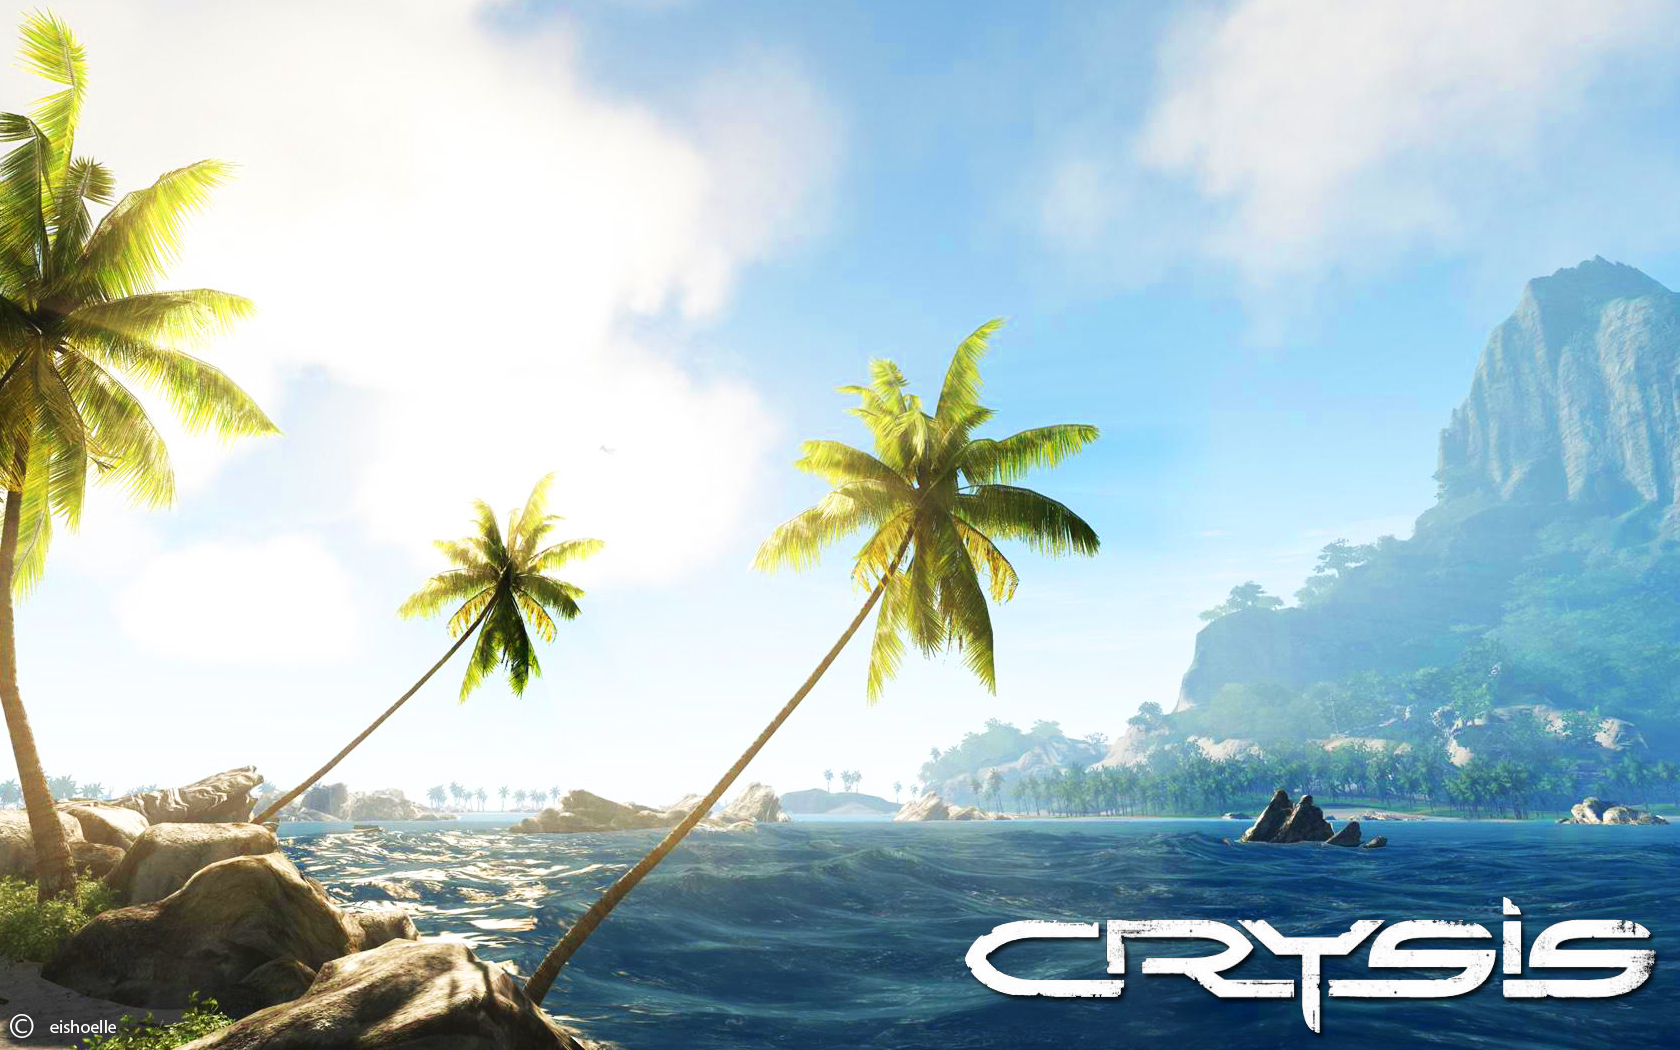 Crysis Widescreen Wallpaper 1 by eishoelle on DeviantArt